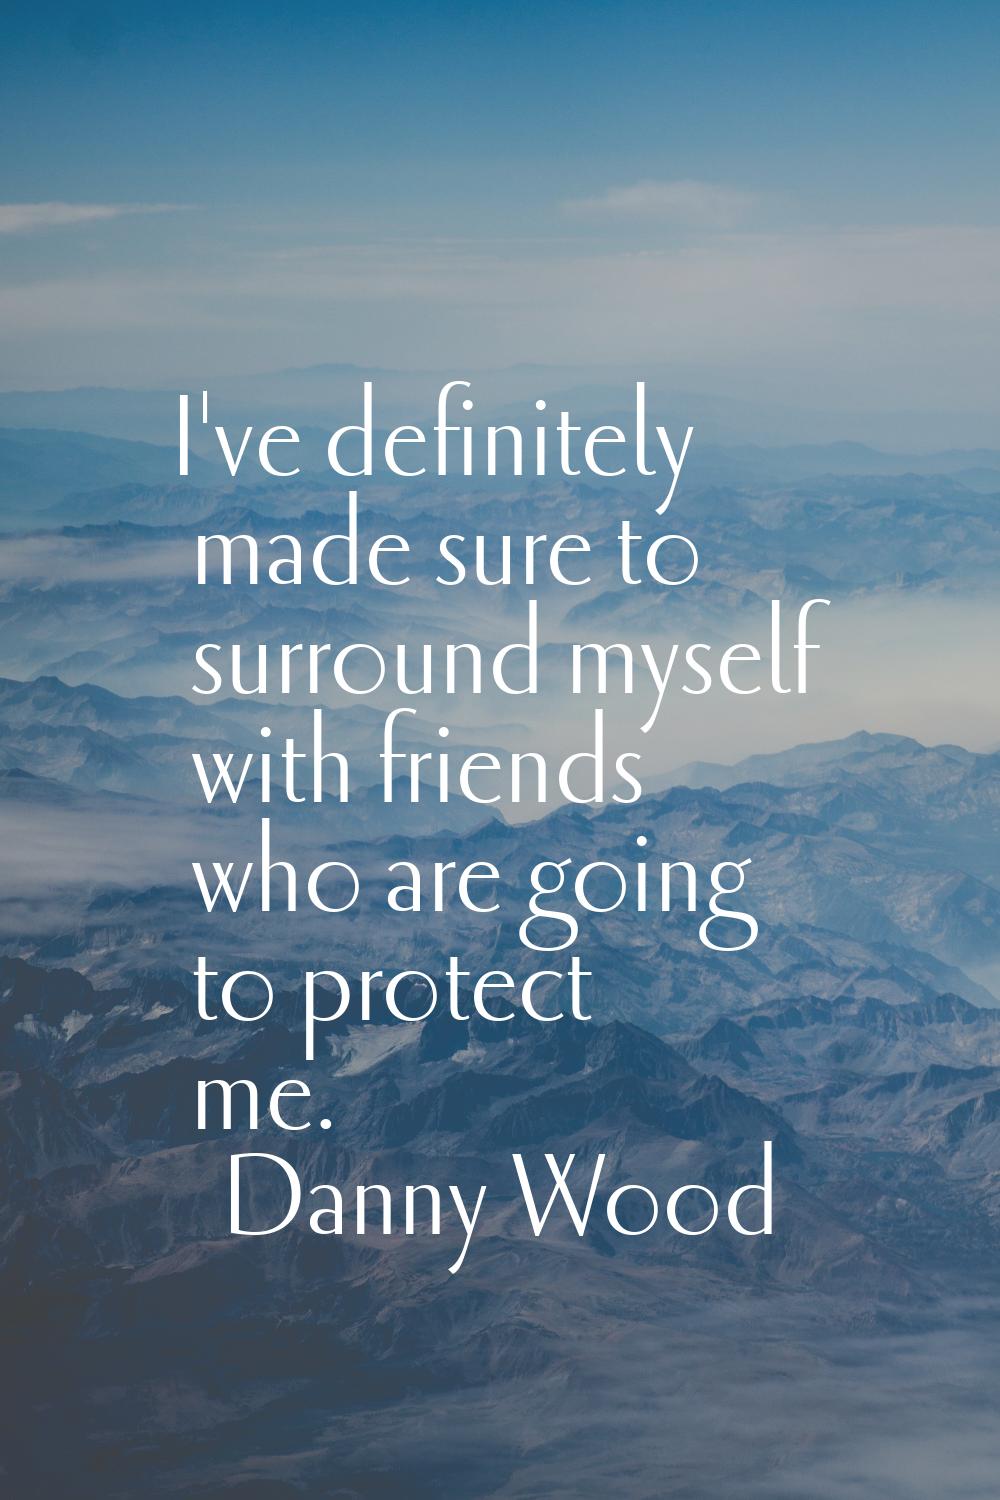 I've definitely made sure to surround myself with friends who are going to protect me.